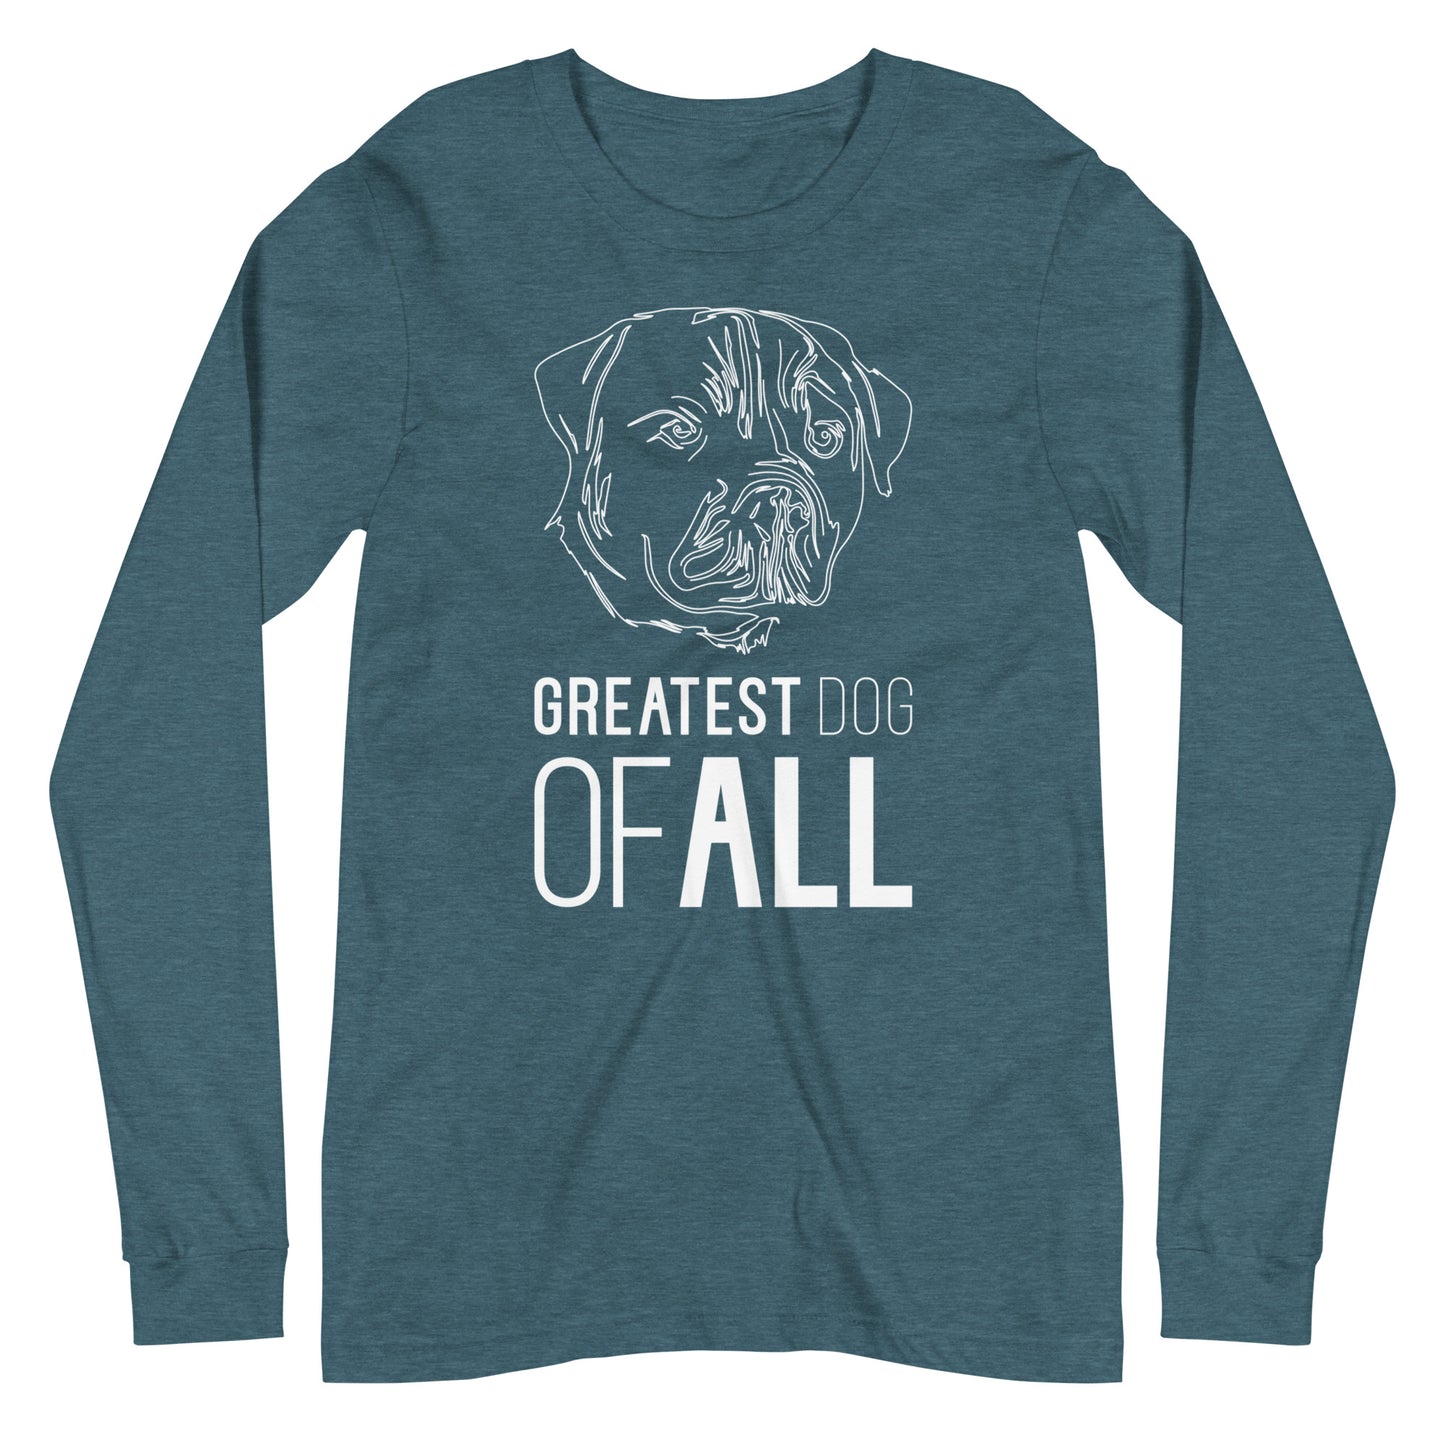 White line Rottweiler face with Greatest Dog of All caption on unisex heather deep teal long sleeve t-shirt